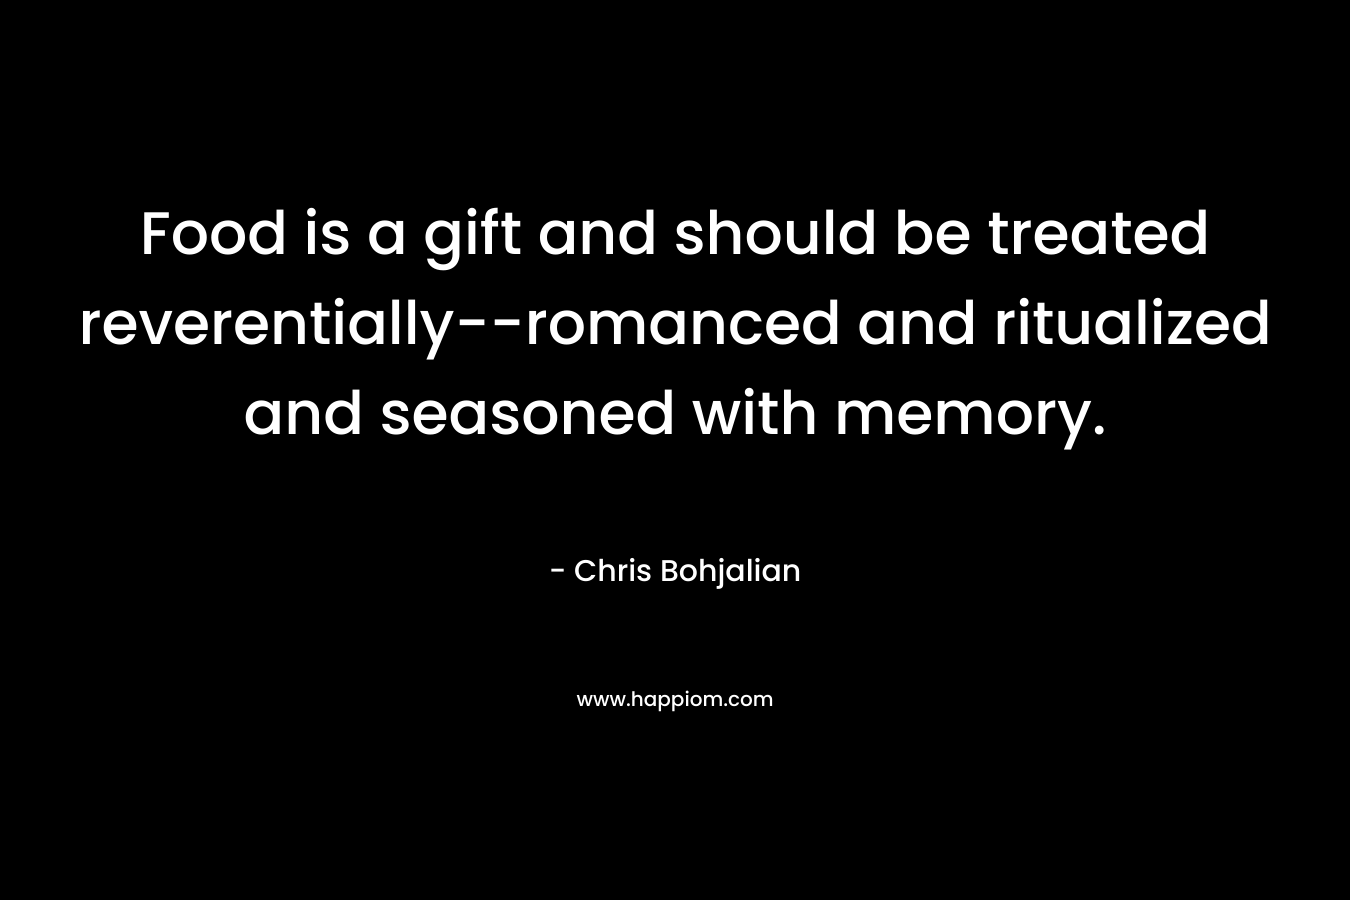 Food is a gift and should be treated reverentially--romanced and ritualized and seasoned with memory.